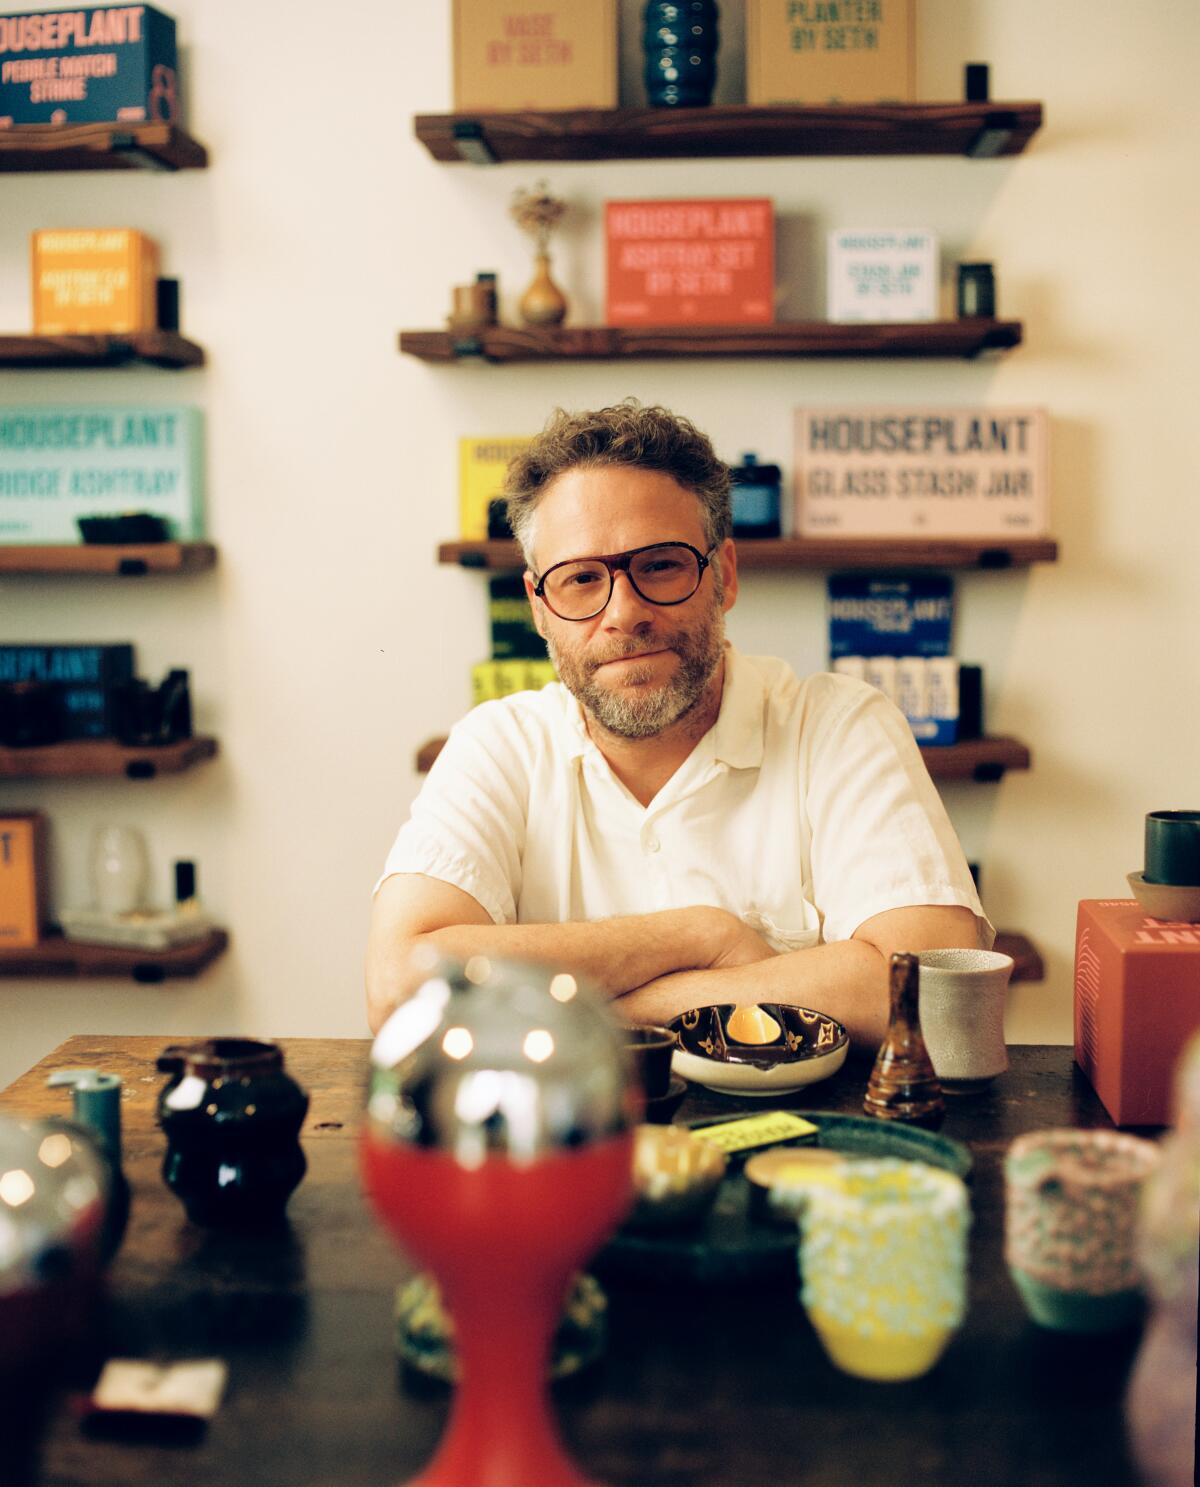 Seth Rogen and some favorite ashtrays from his extensive collection.